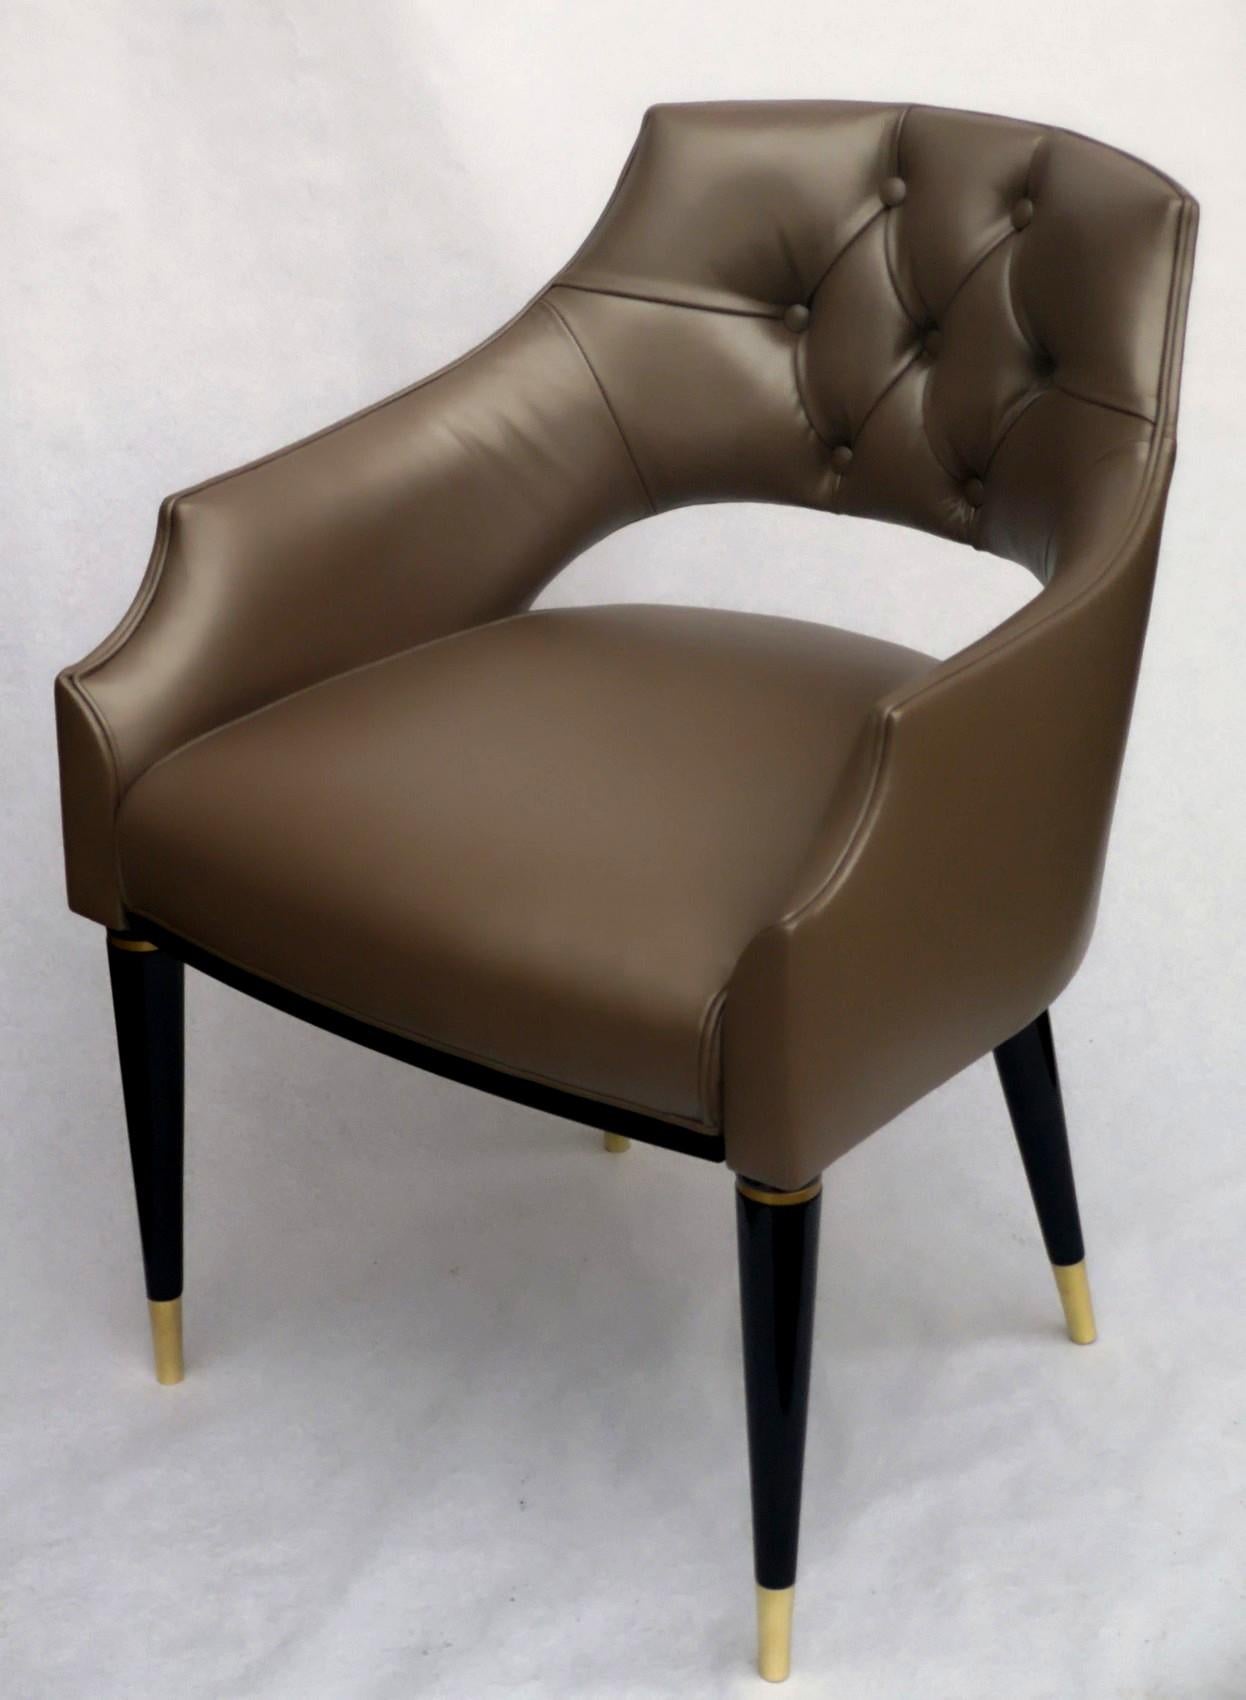 Dining Armchair, Tufted Fiore Italian Leather, Midcentury Style, Luxury Details 3